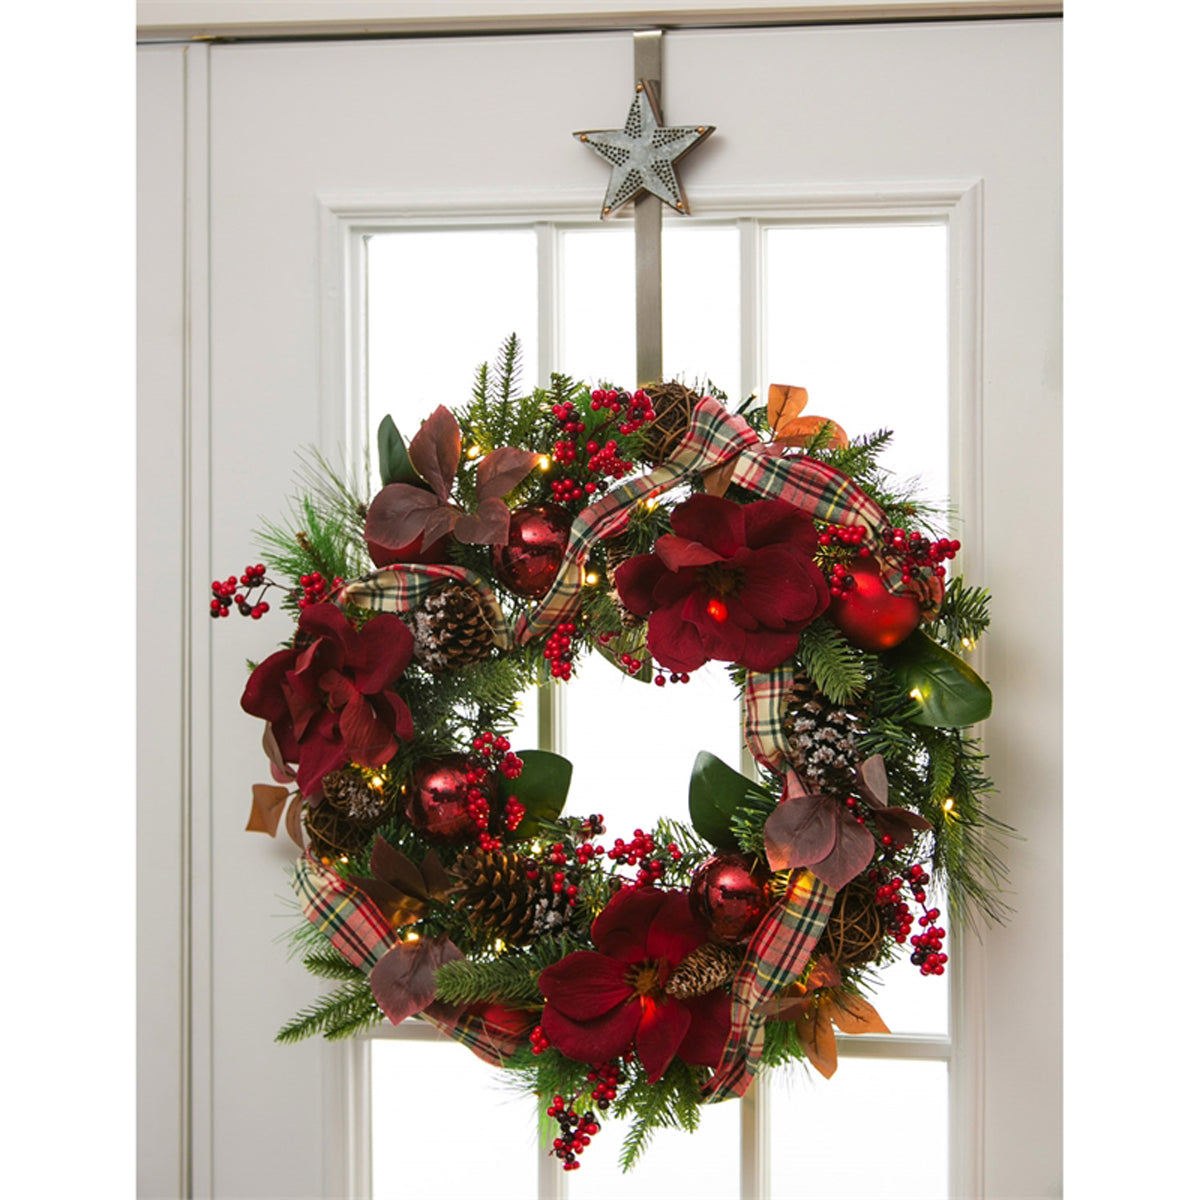 LED Wreath with Plaid Ribbon, Red Ornaments, Berries, and Pine cone 24"